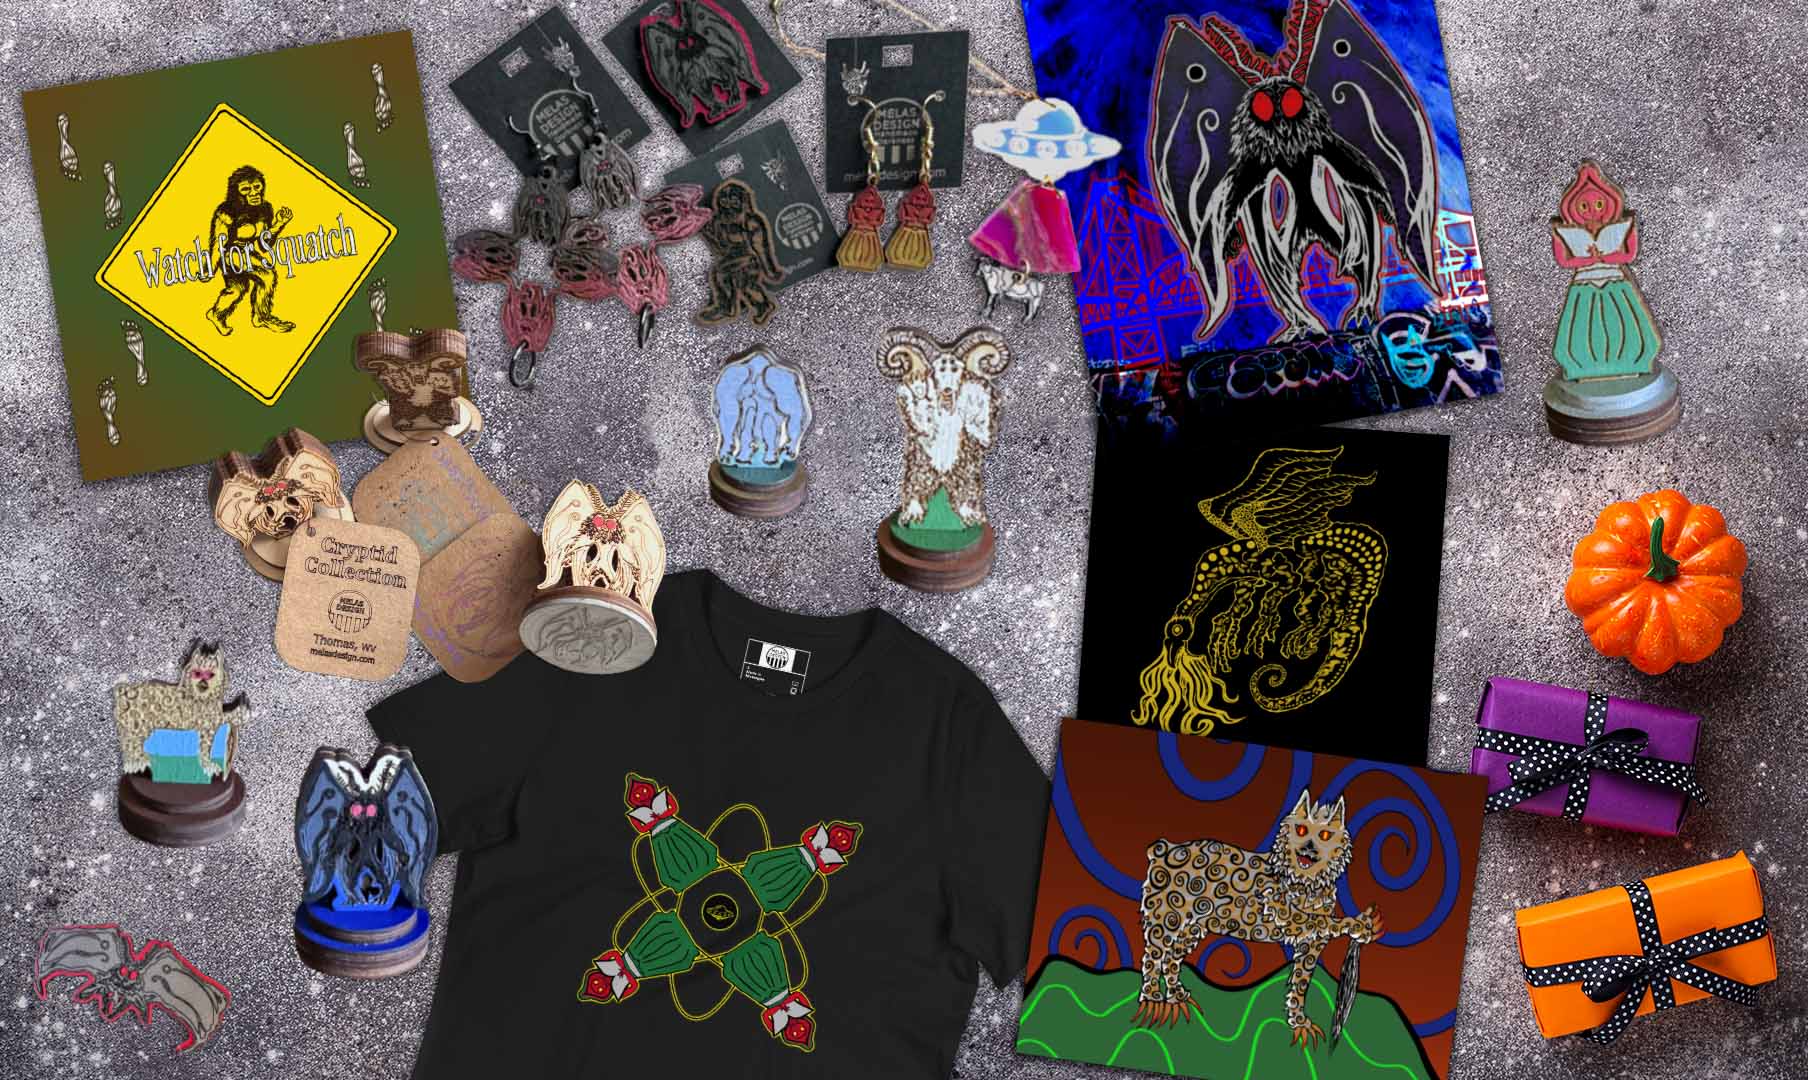 Cryptid Collection; Melasdesign; WV cryptids; cryptid core; gift ideas; gifts; posters; jewelry; figurines; t-shirts; barrettes; pins; artist Susan Hicks; Thomas WV; bigfoot; Flatwoods Monster; Sheepsquatch; Taily-Po; Grafton Monster; Mothman